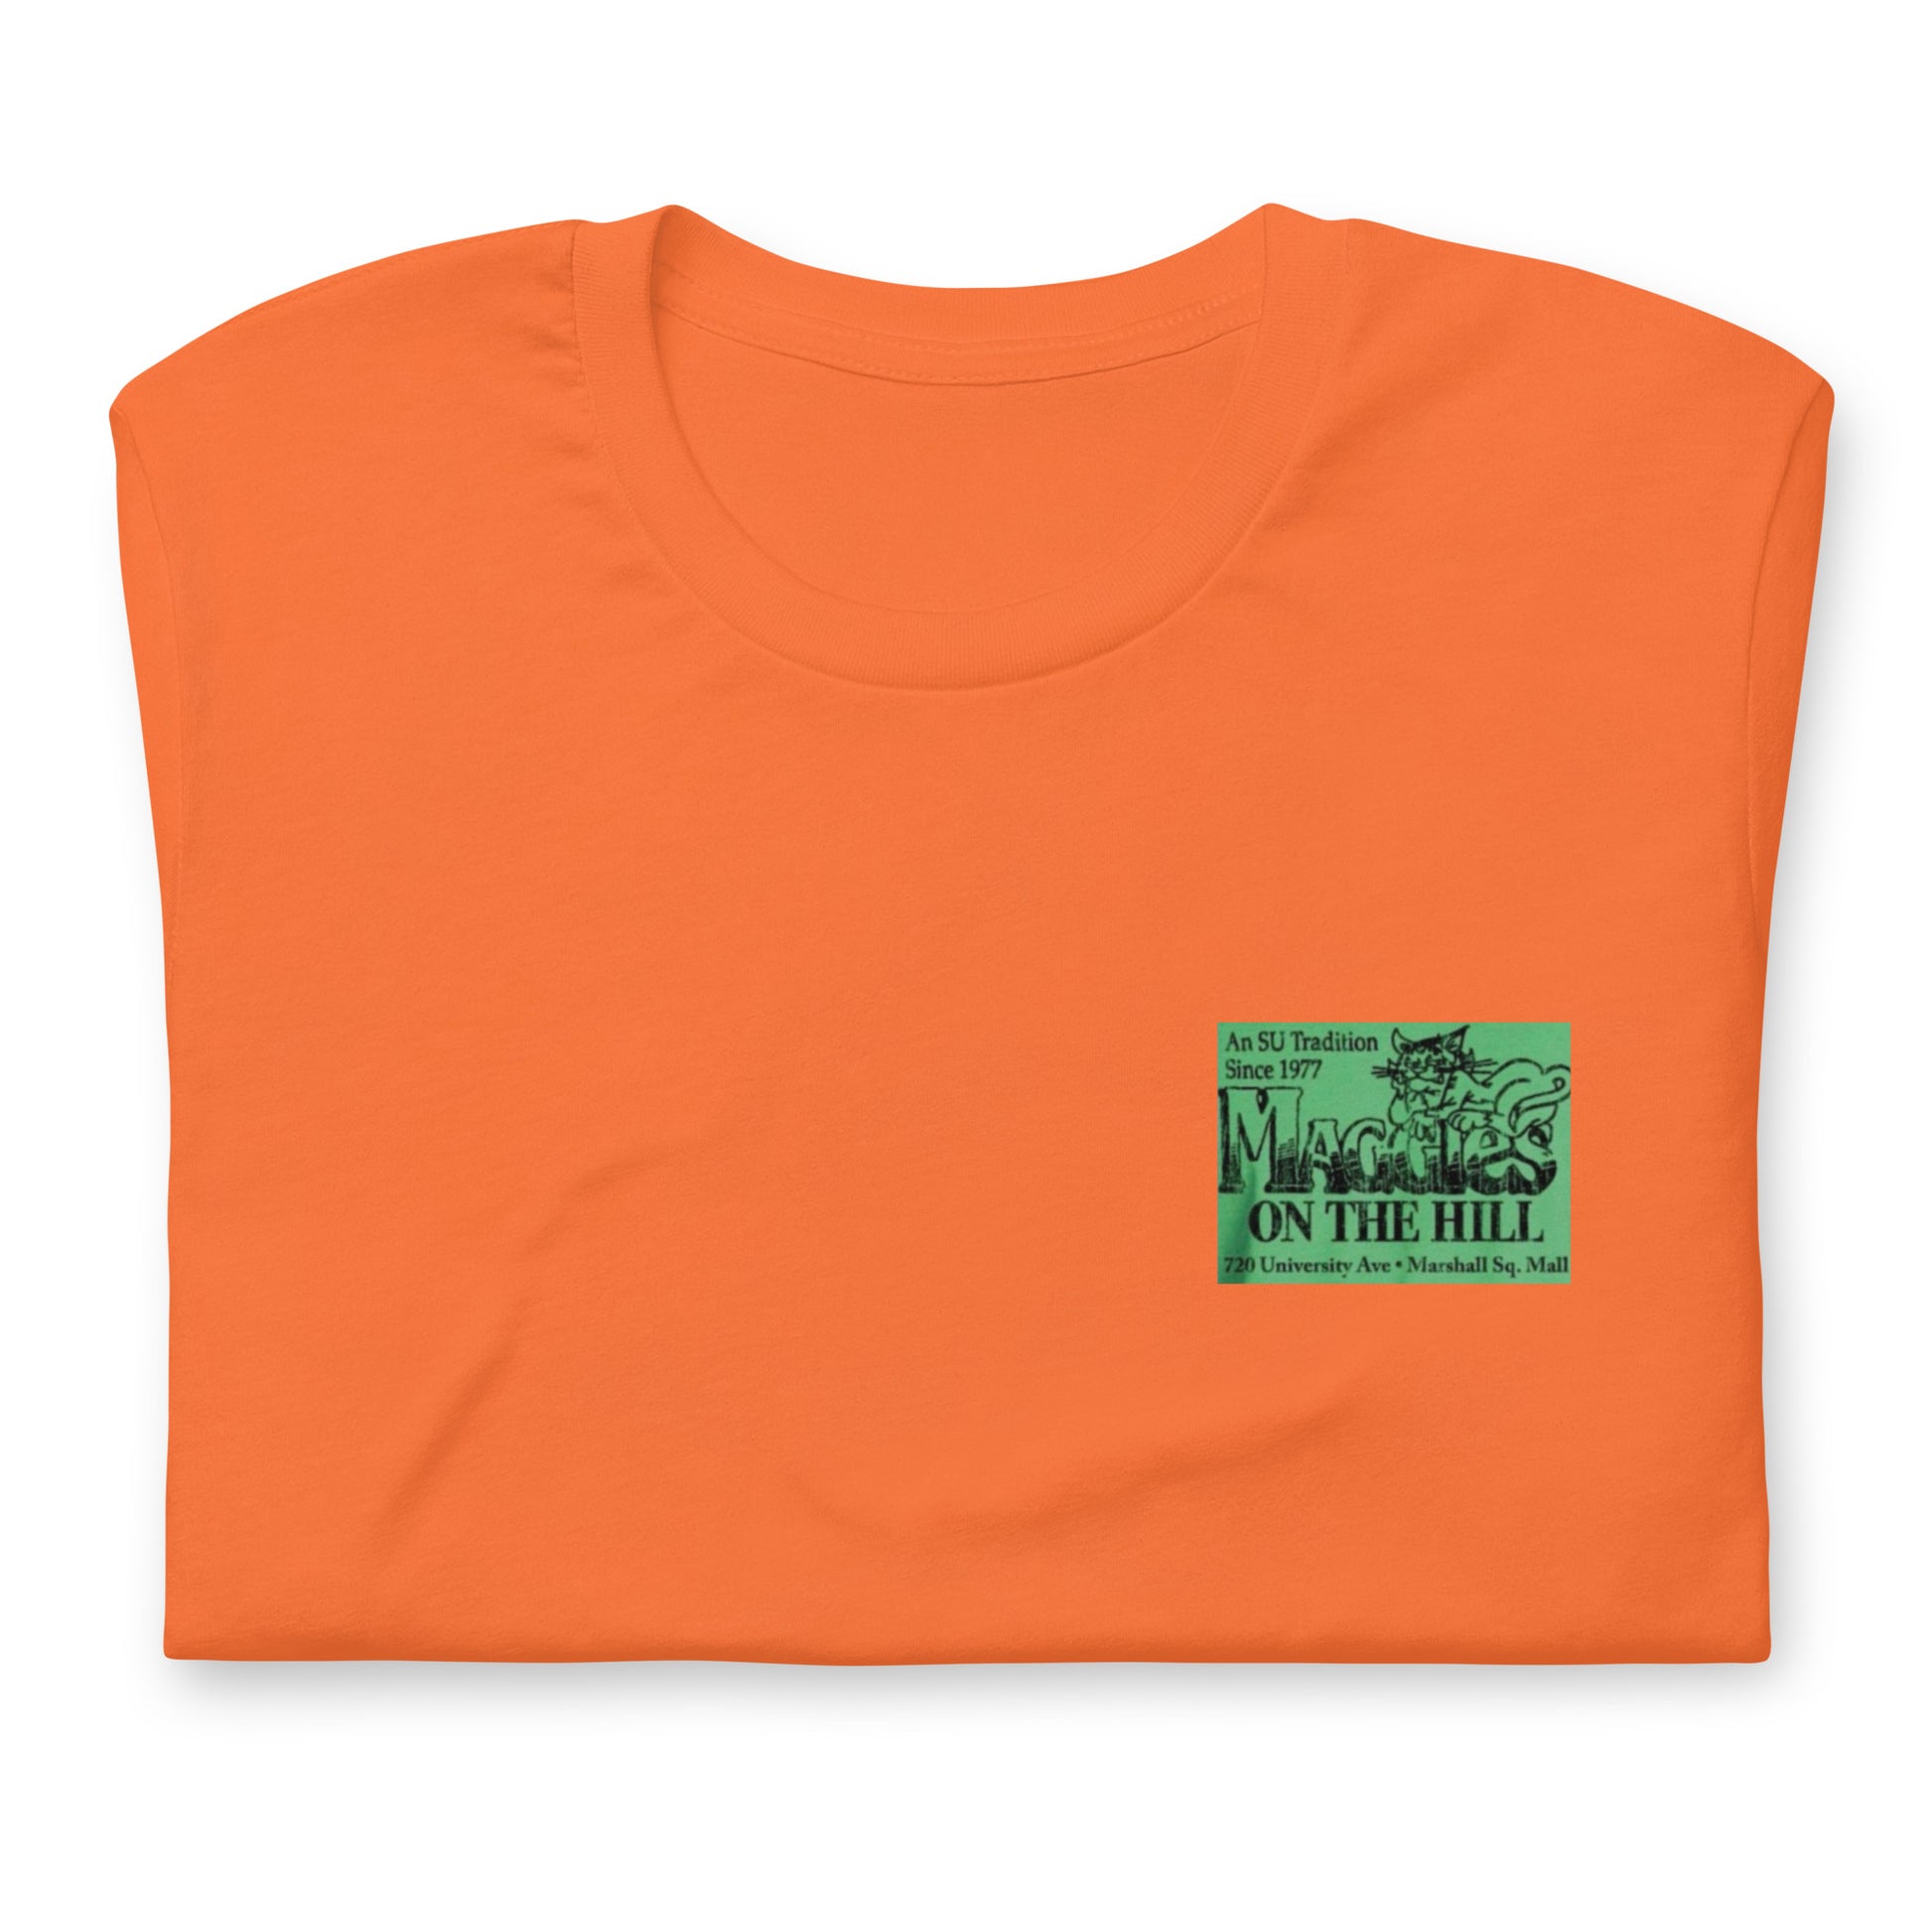 Orange tee shirt that says 'Maggie's on the Hill' in green and black